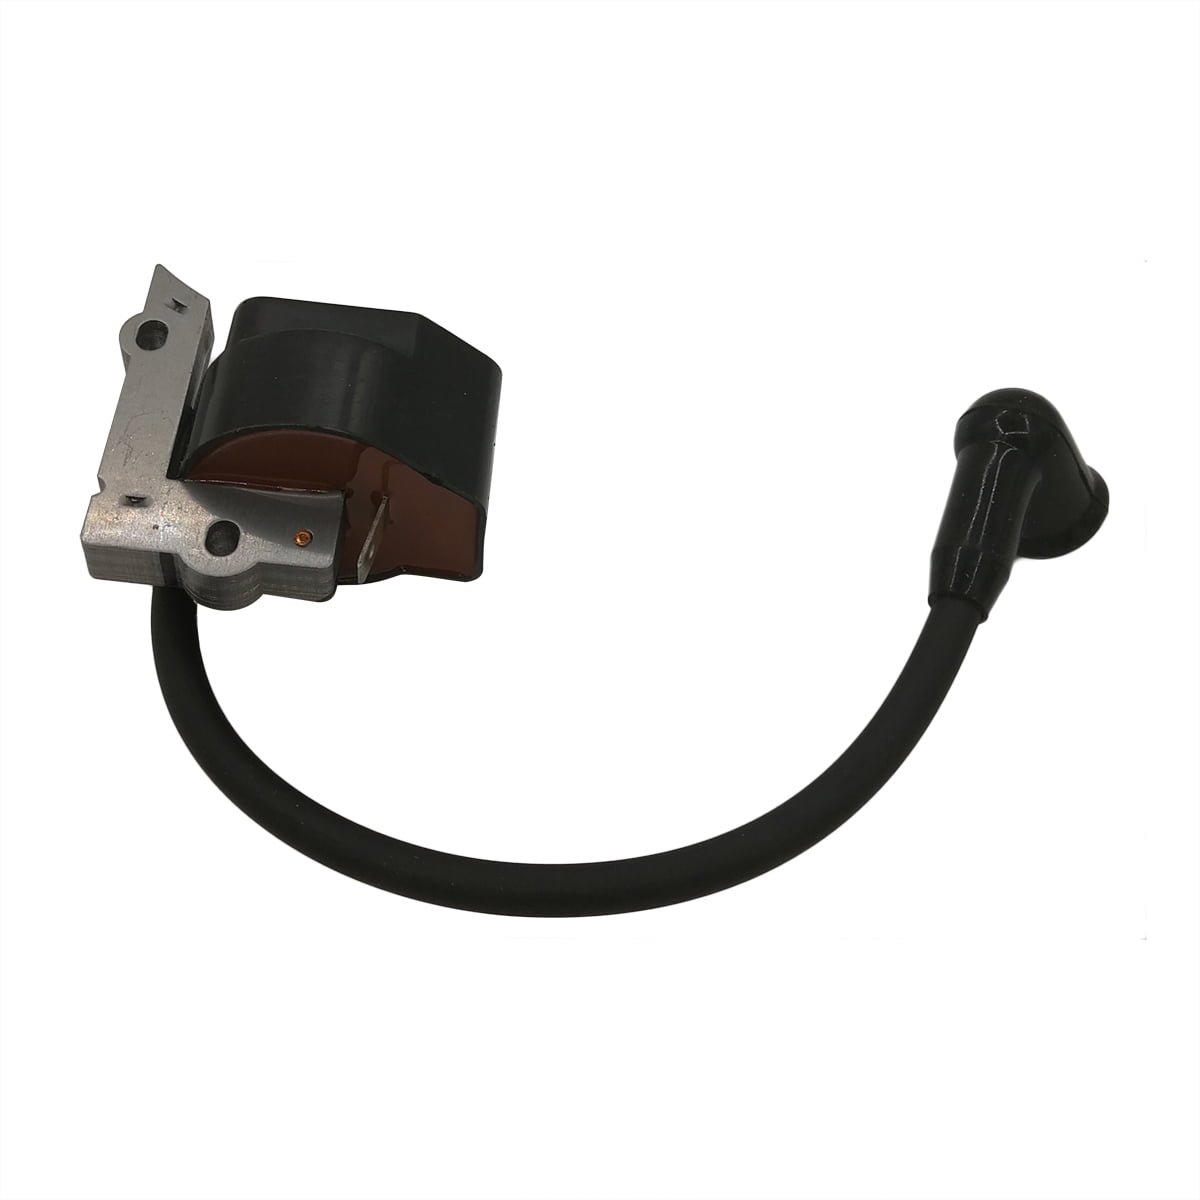 shiosheng Ignition Module Coil for Poulan Sears Craftsman Weed Eater Blowers Husqvarna PP025 PP125 PP25E PP325 P4500 P4500F Trimmer PP258TP PP133 PP125 545081826